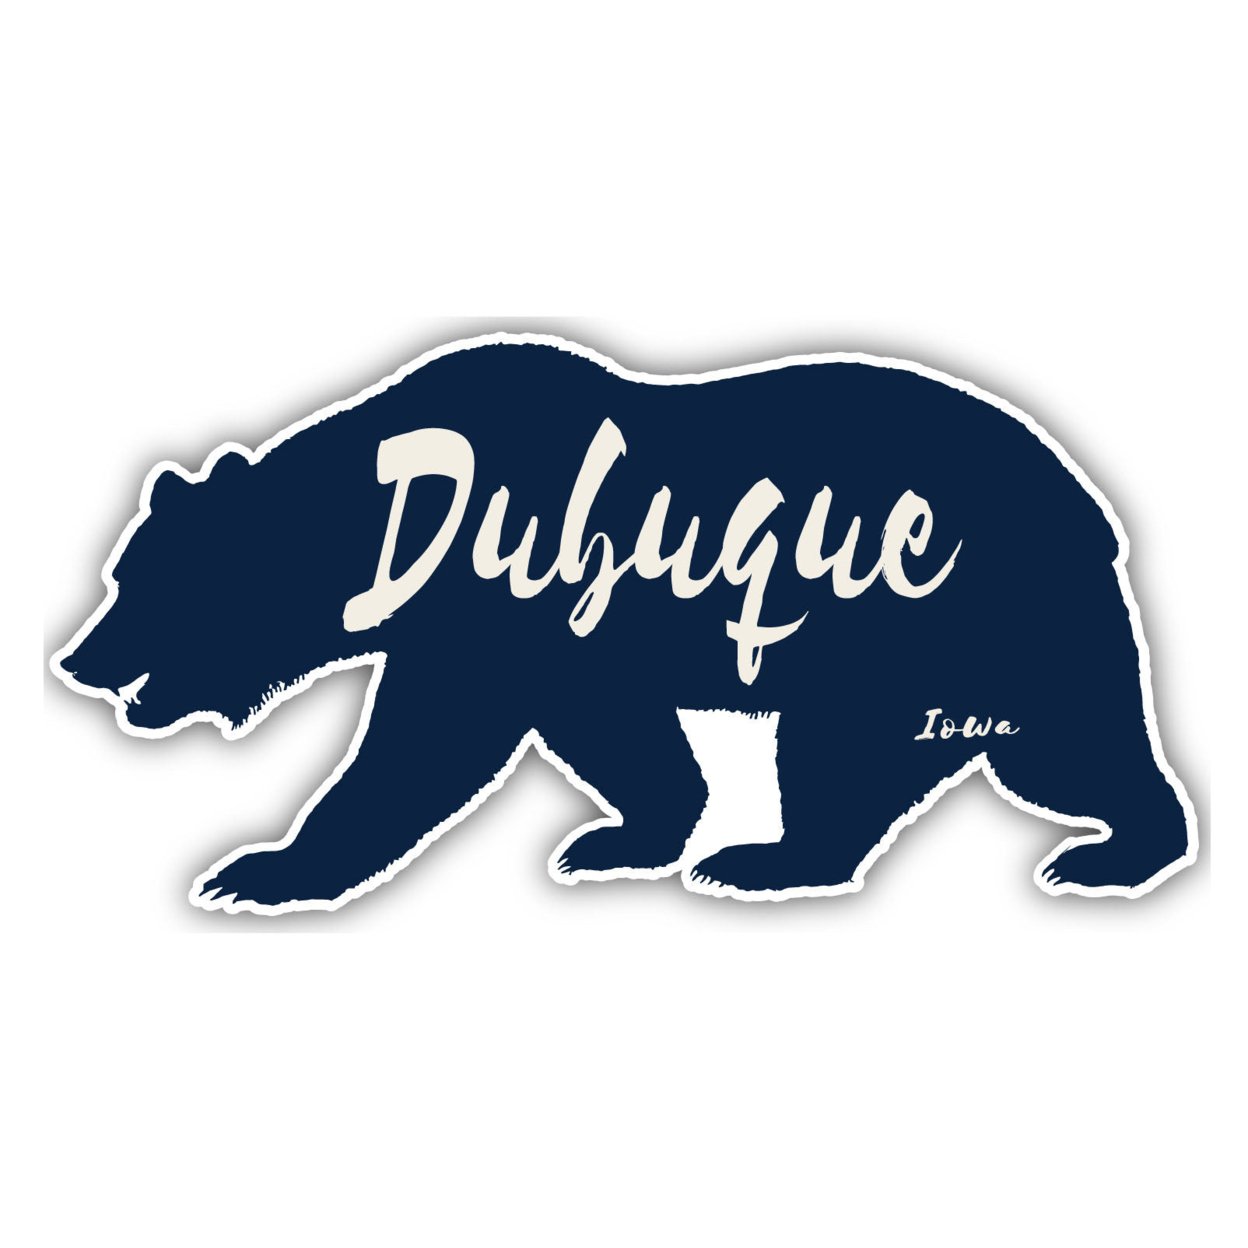 Dubuque Iowa Souvenir Decorative Stickers (Choose Theme And Size) - 4-Pack, 6-Inch, Great Outdoors